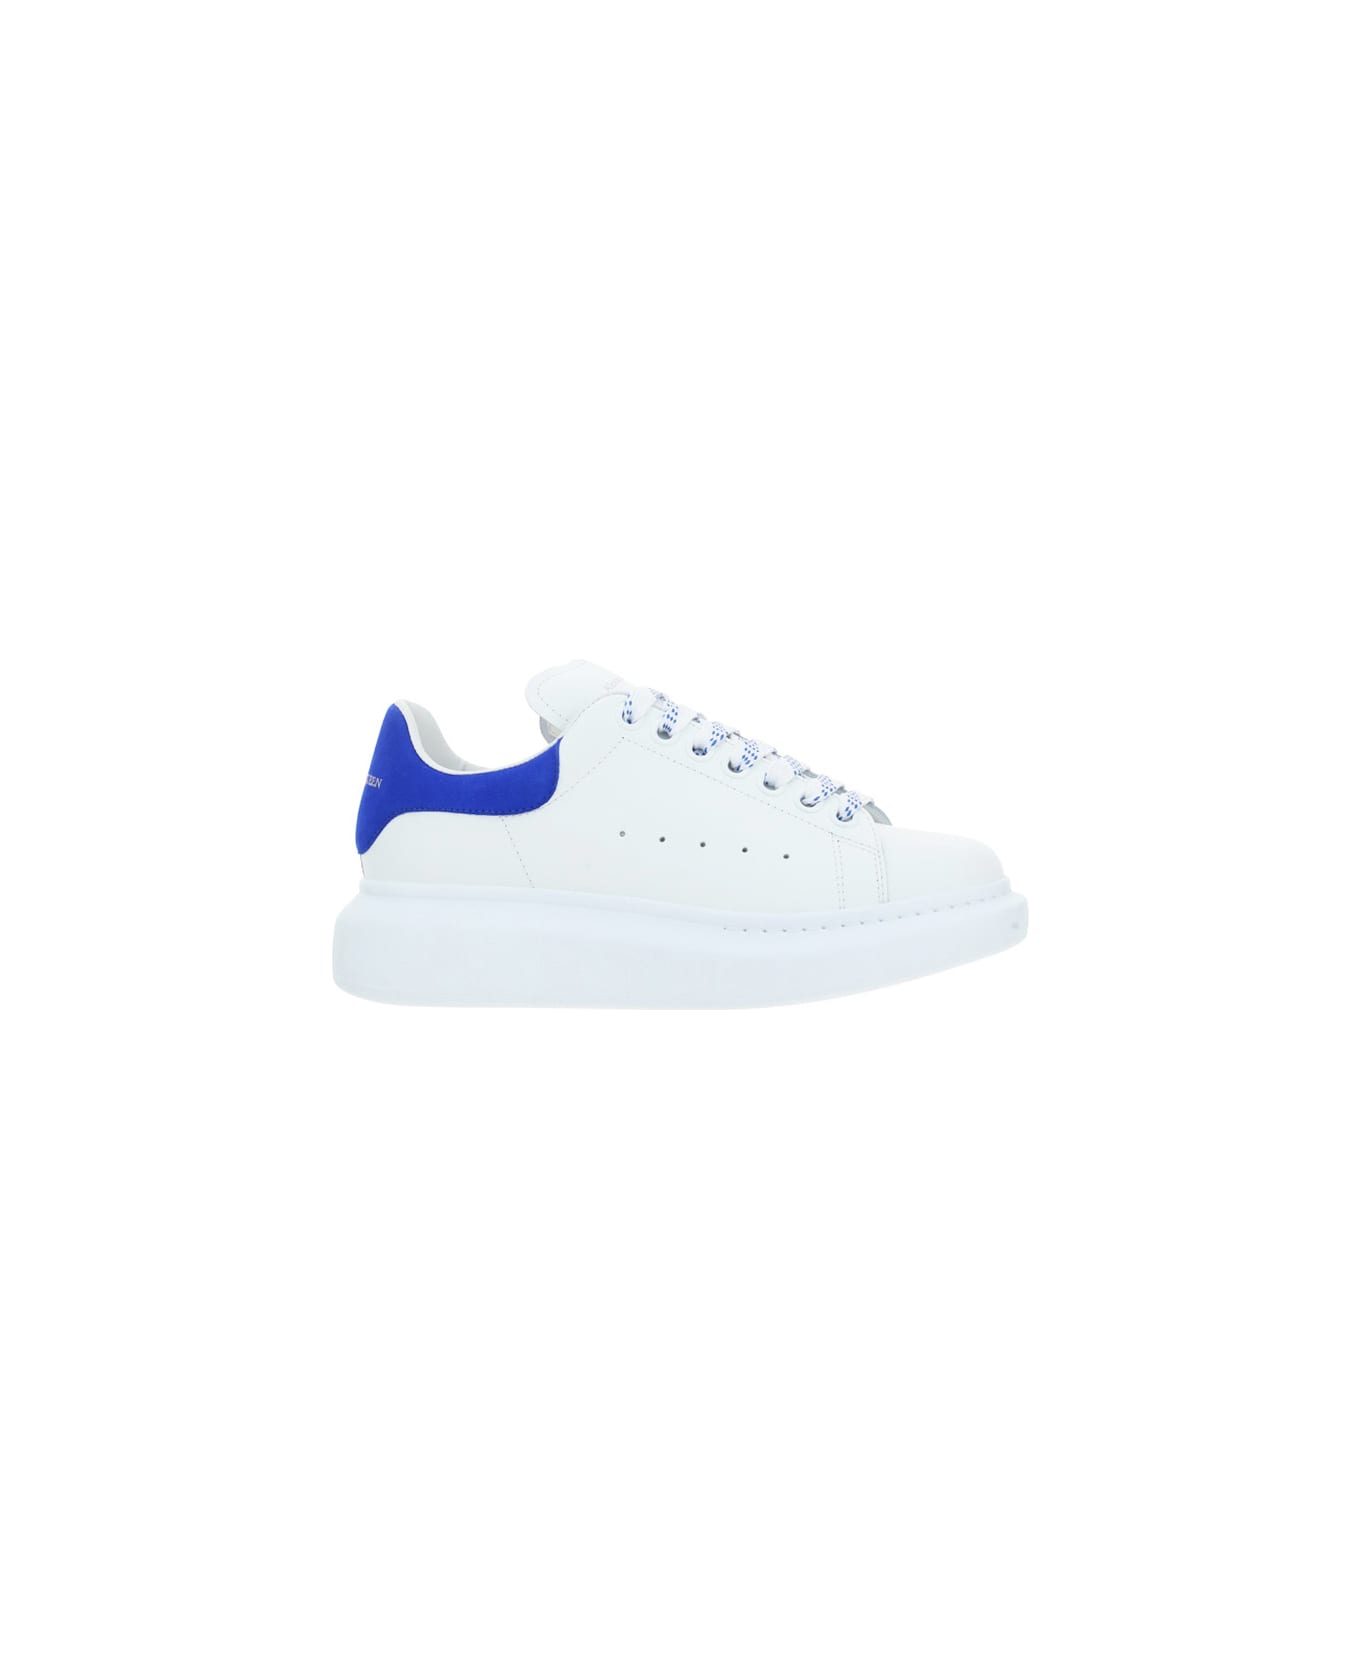 Alexander McQueen Sneakers - White/elect.blue